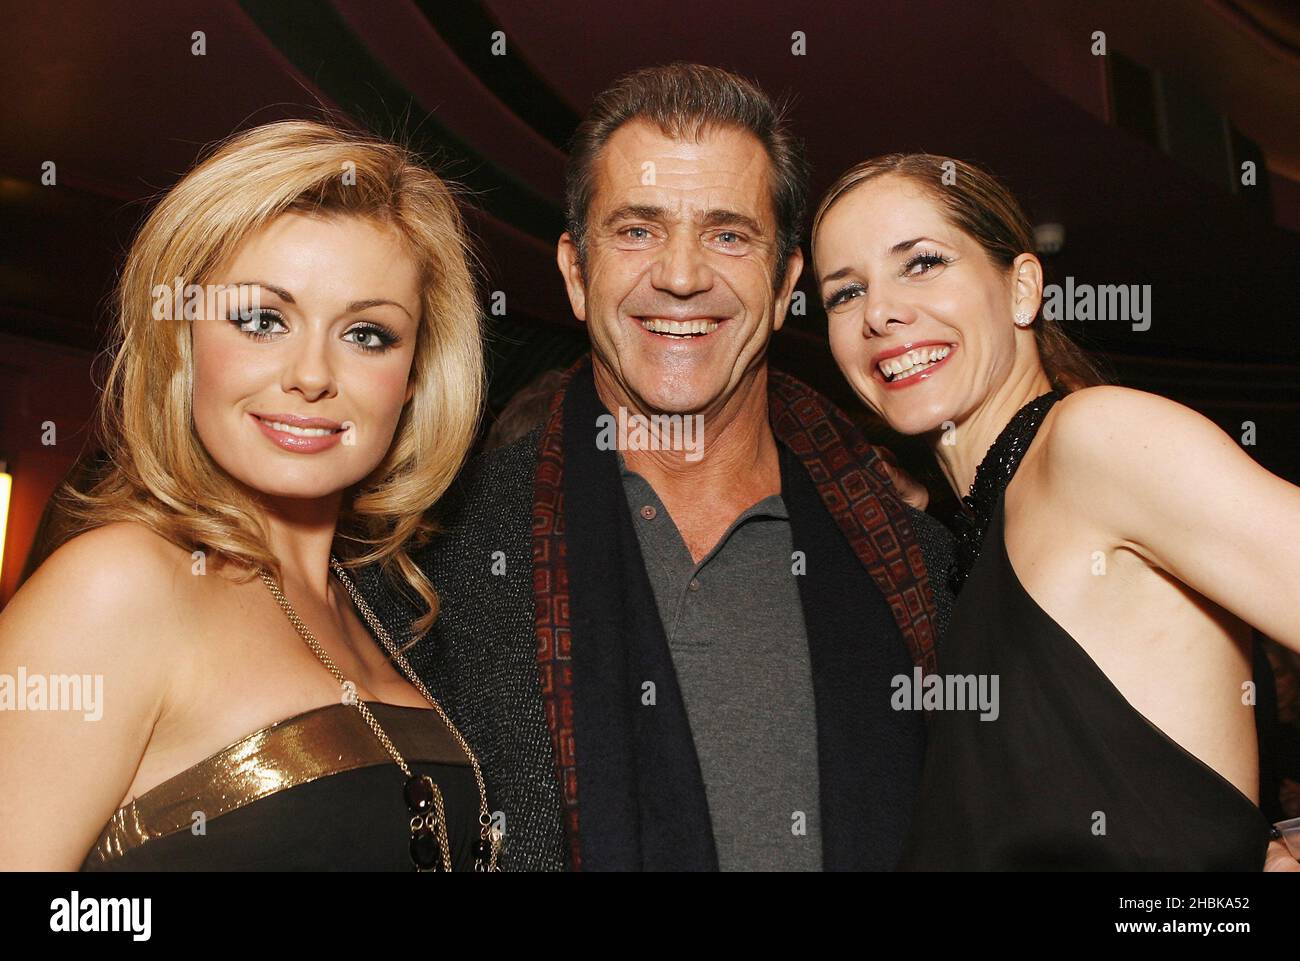 Katherine Jenkins, Mel Gibson, and Darcy Bussell at the Reception at the Viva La Diva, Carling Apollo, Hammersmith, London. Stock Photo